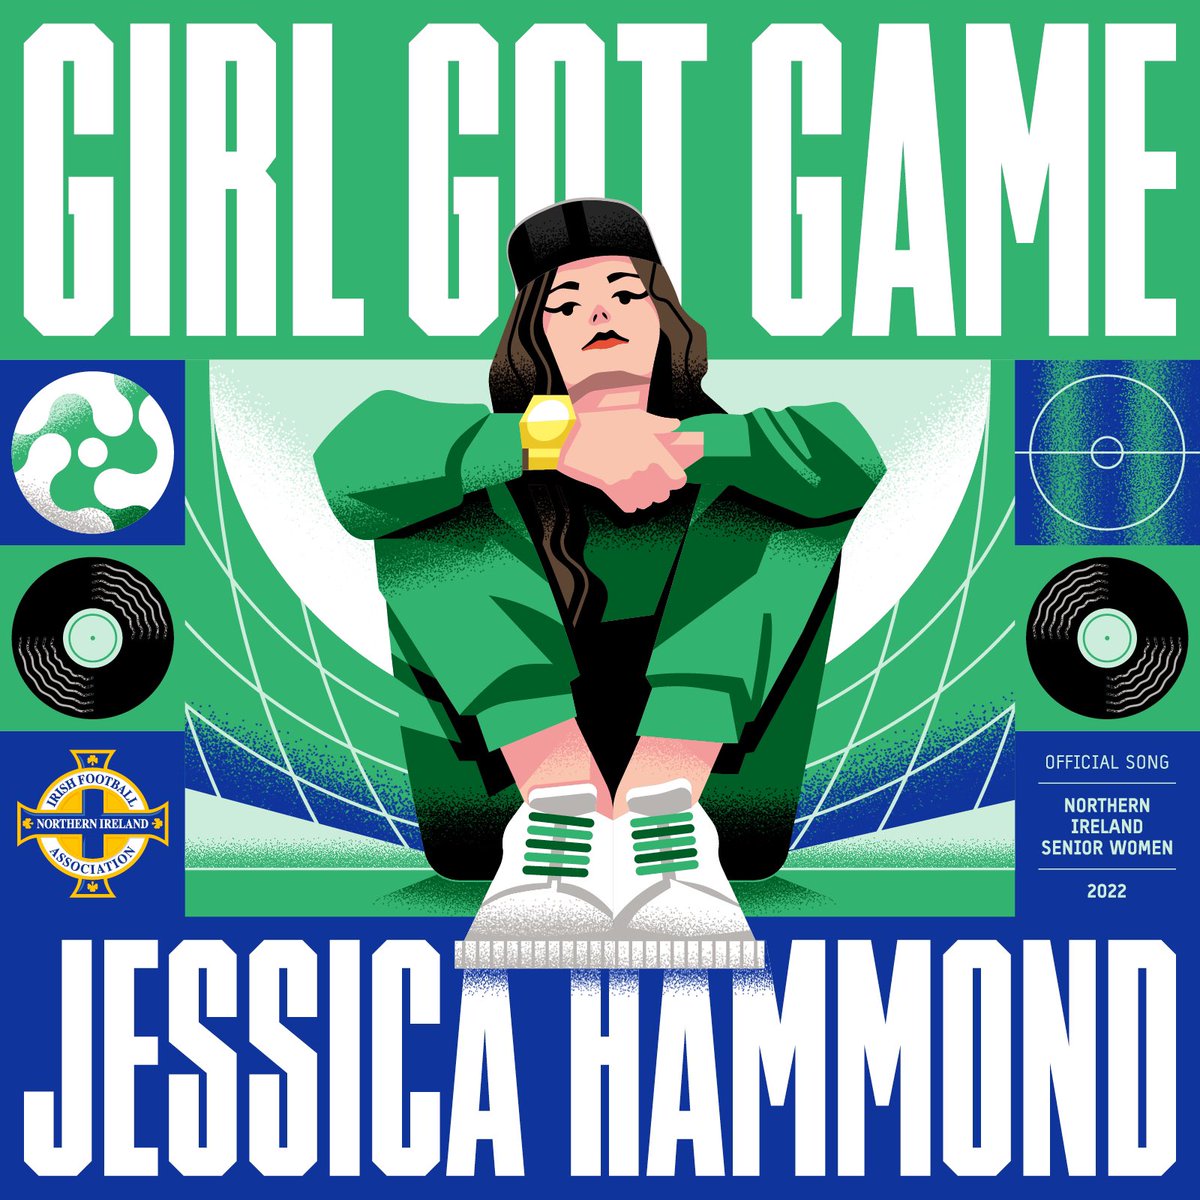 The Official Song for the Northern Ireland Women’s Football team for their Euro 2022 campaign. ‘Girl Got Game’ is out NOW! An unbelievable team, Let’s go GAWA 🙌🏼 lnk.fu.ga/jessicahammond… #girlgotgame #gawa #northernireland @IrishFA @UEFAWomensEURO @ParagonMGroup @ostereomusic